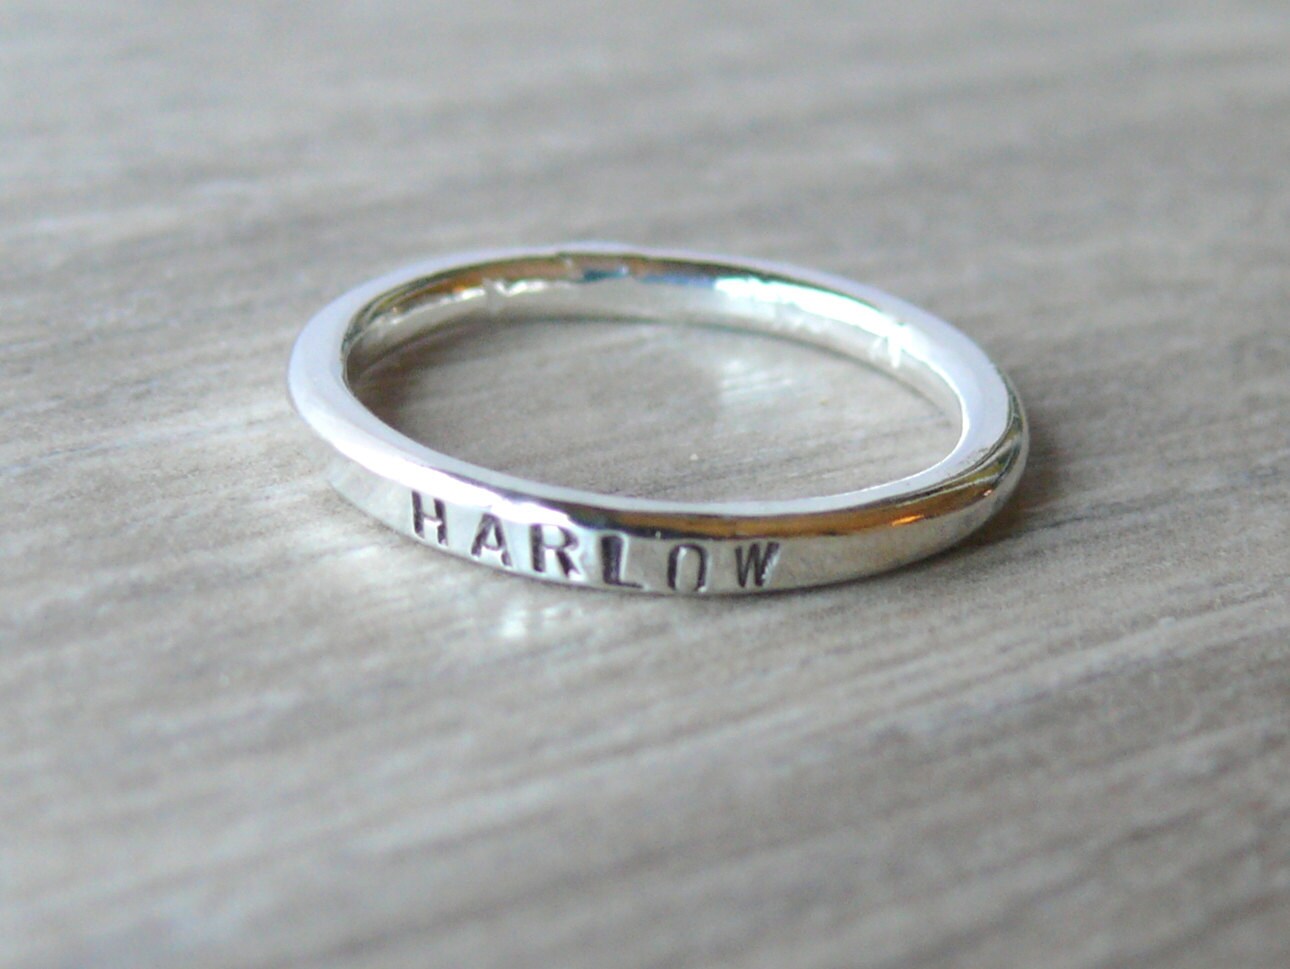 Personalized name ring sterling silver by WatchMeWorld on Etsy